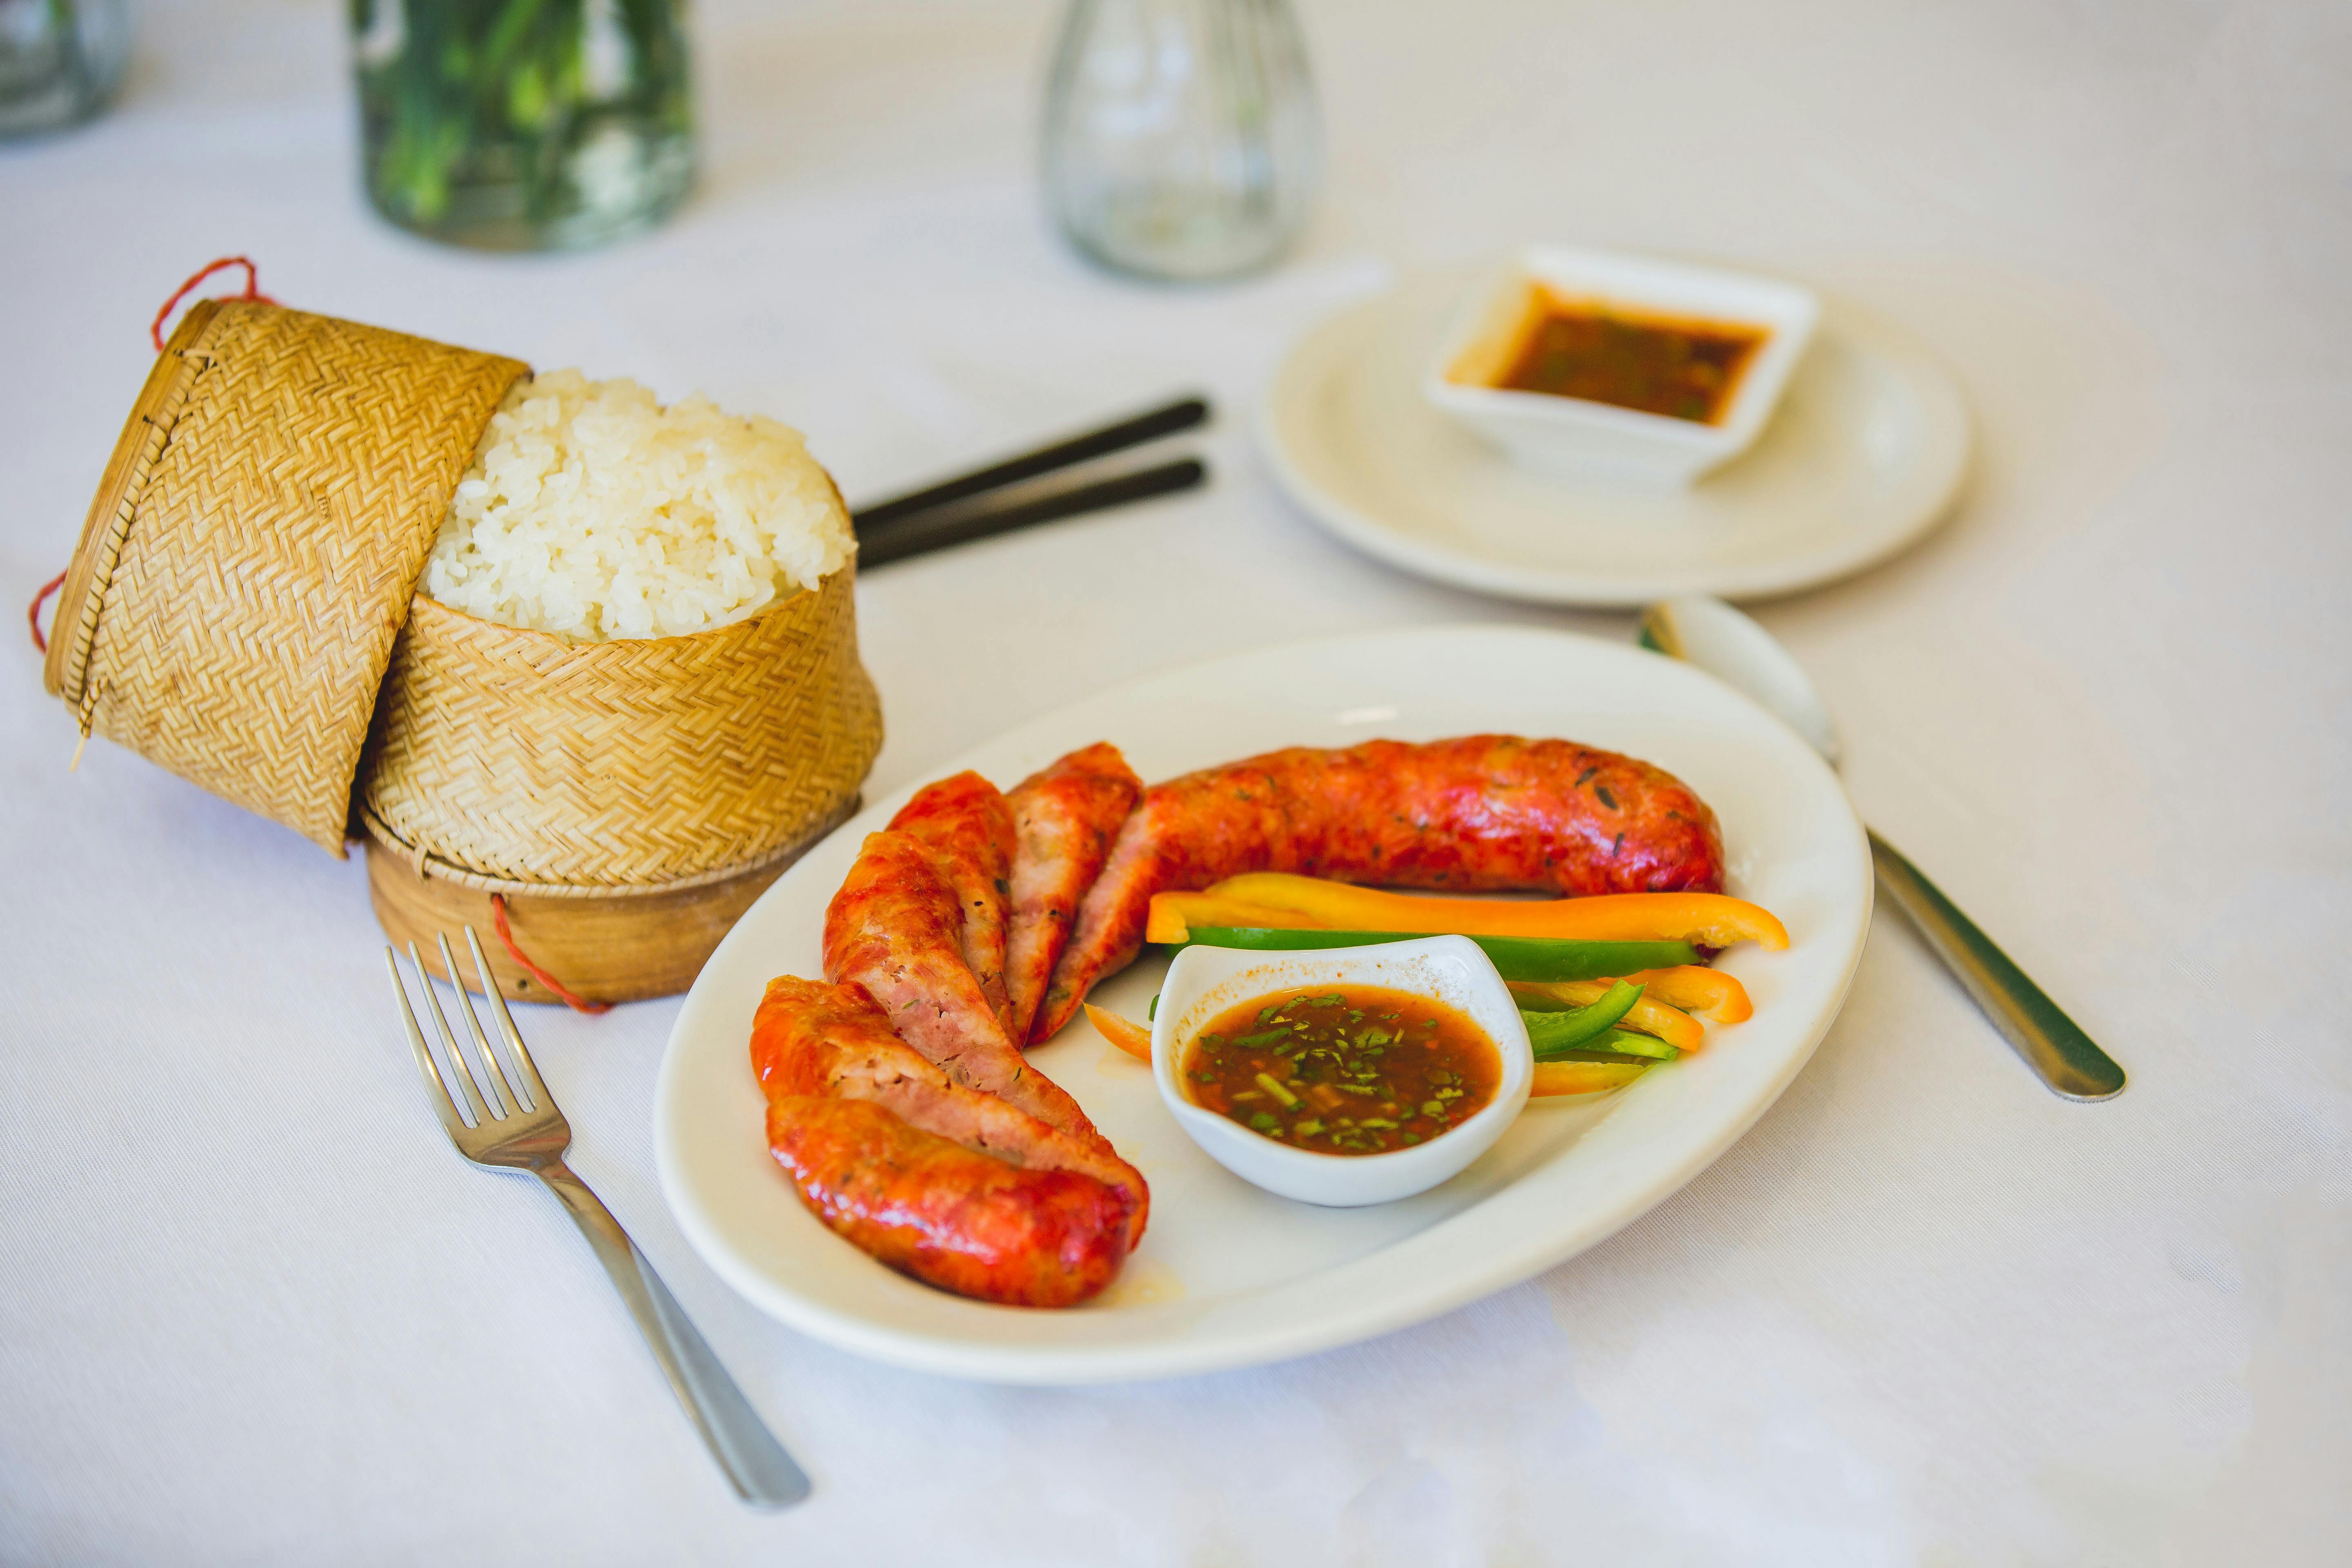 11. Hmong Sausage with Sticky Rice from Hmong's Golden Egg Roll in La Crosse, WI